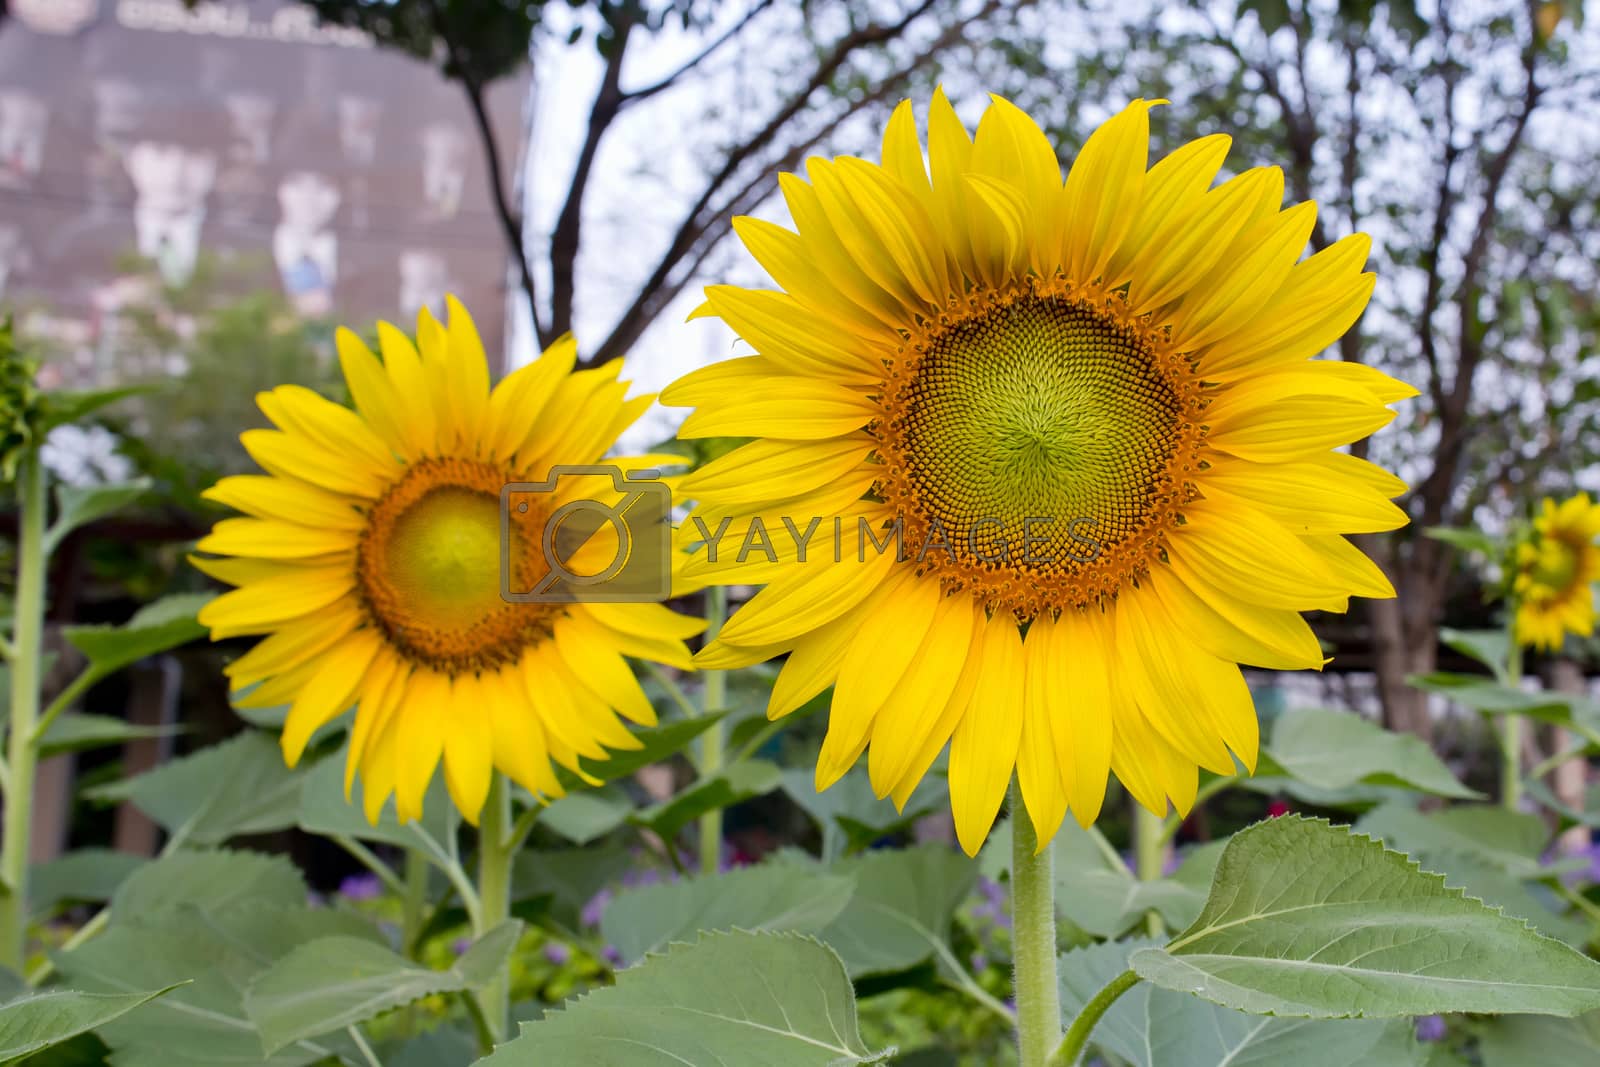 Royalty free image of blooming sunflowers by art9858